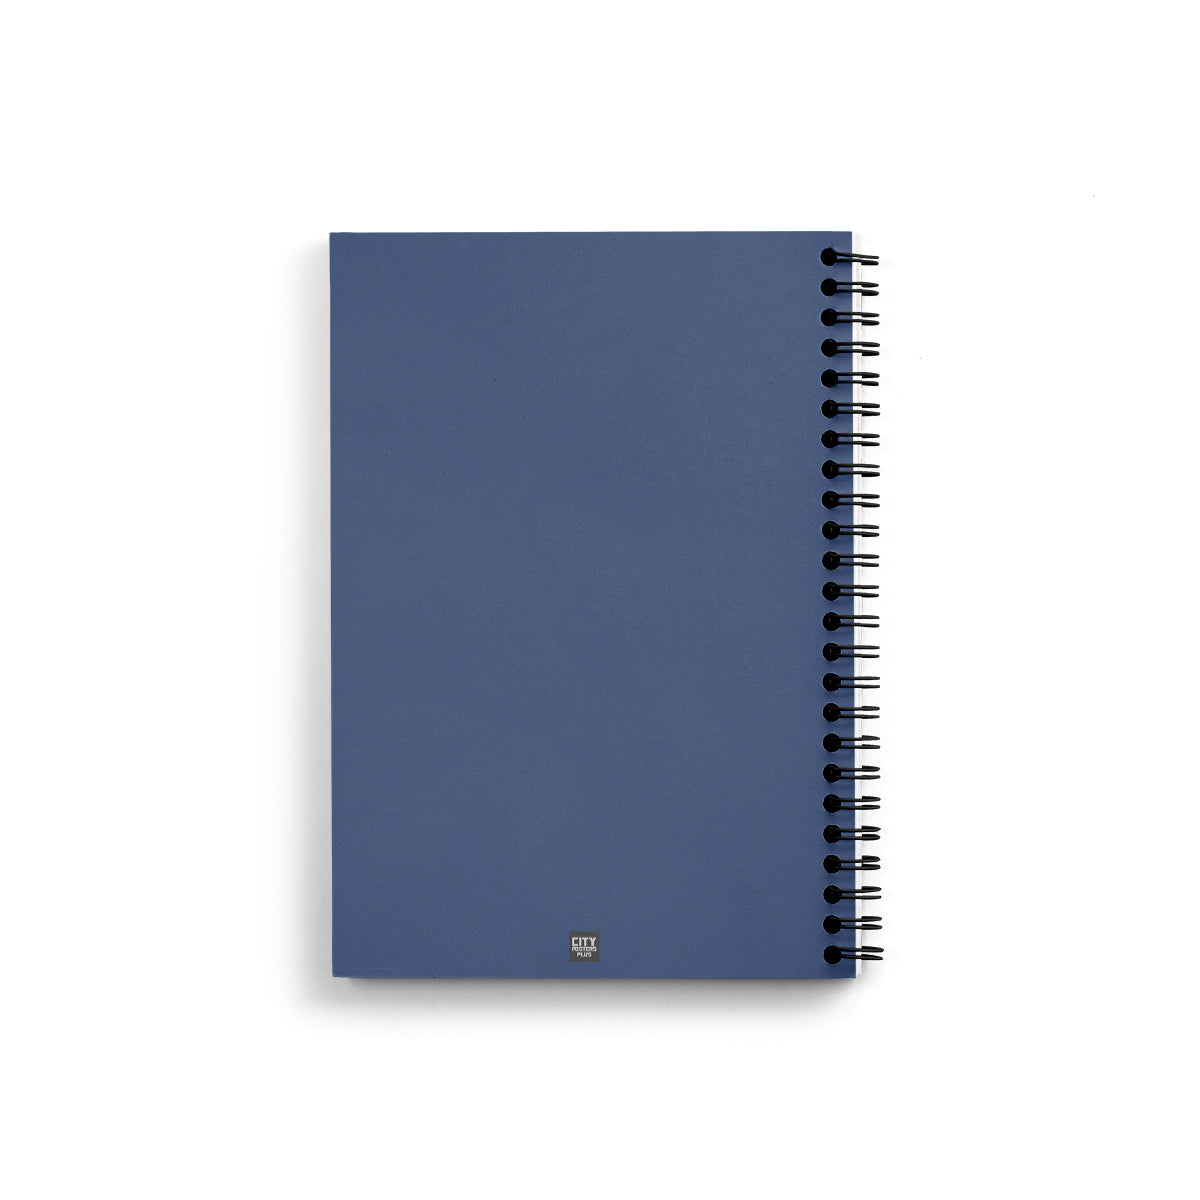 51 Number Notebook (Navy Blue, A5 Size, 100 Pages, Ruled, 4 Pack)